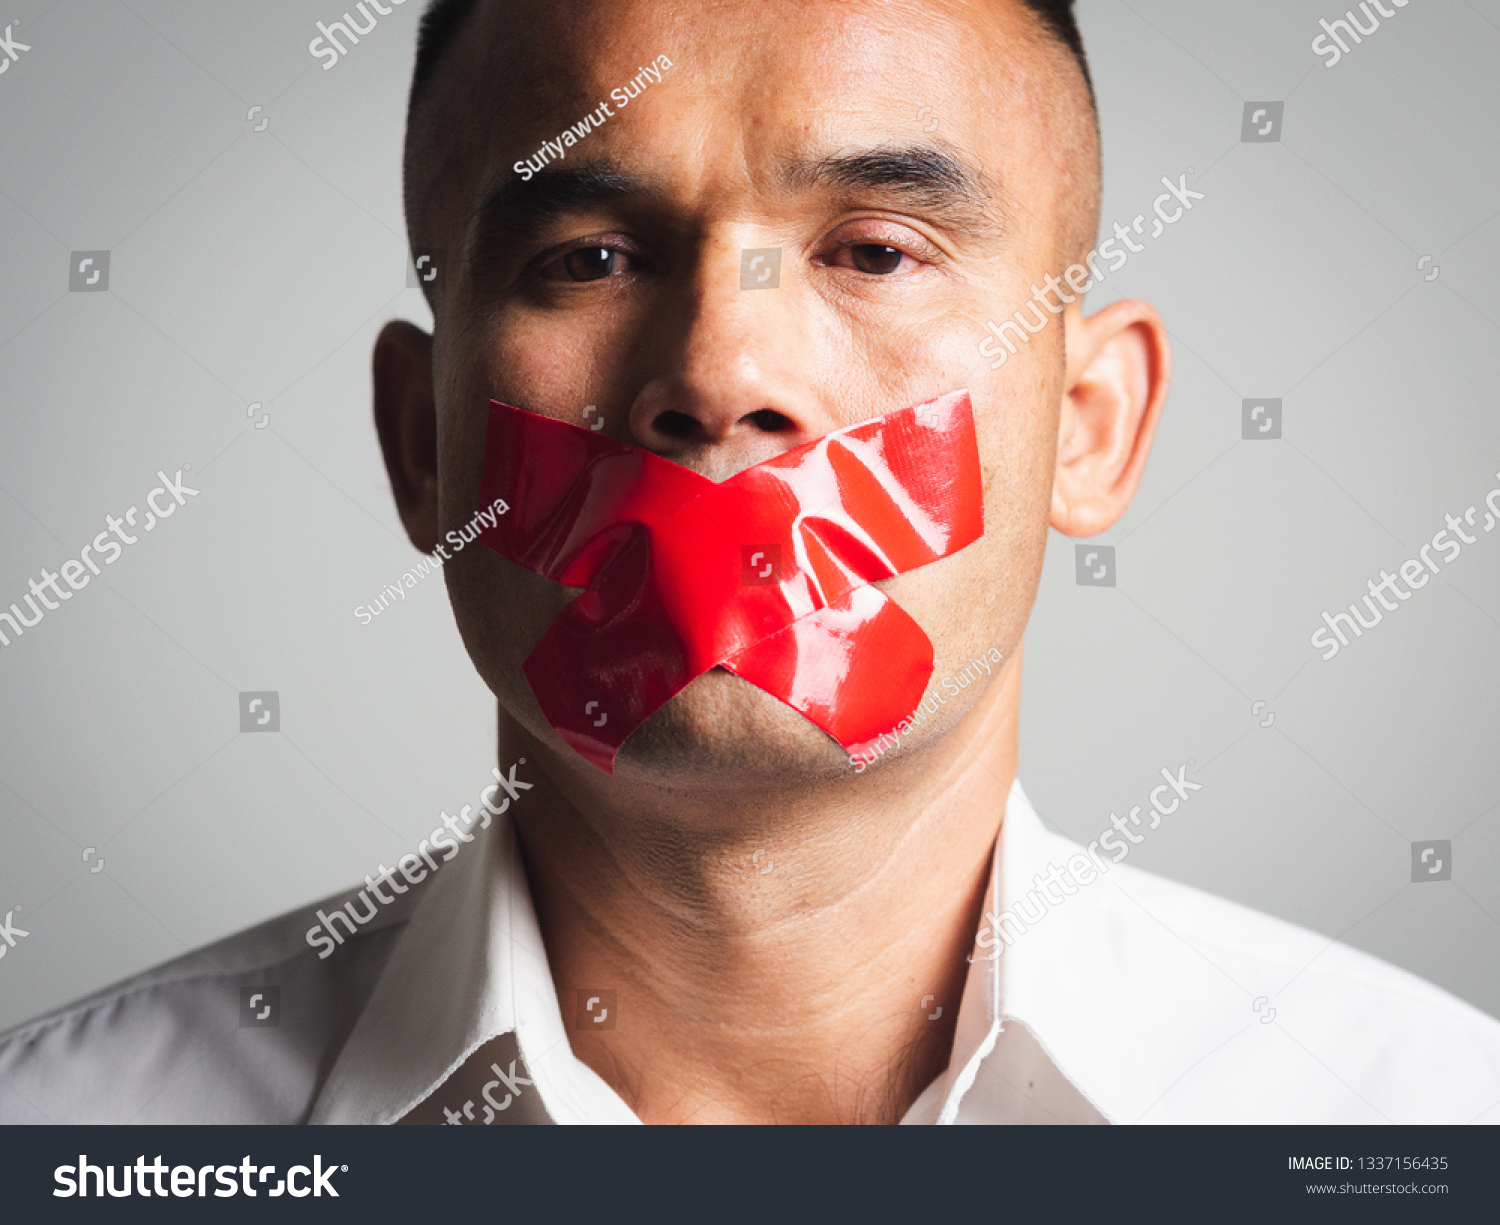 Man is silenced with adhesive red tape across his mouth sealed to prevent him from speaking. Freedom Concept. #1337156435